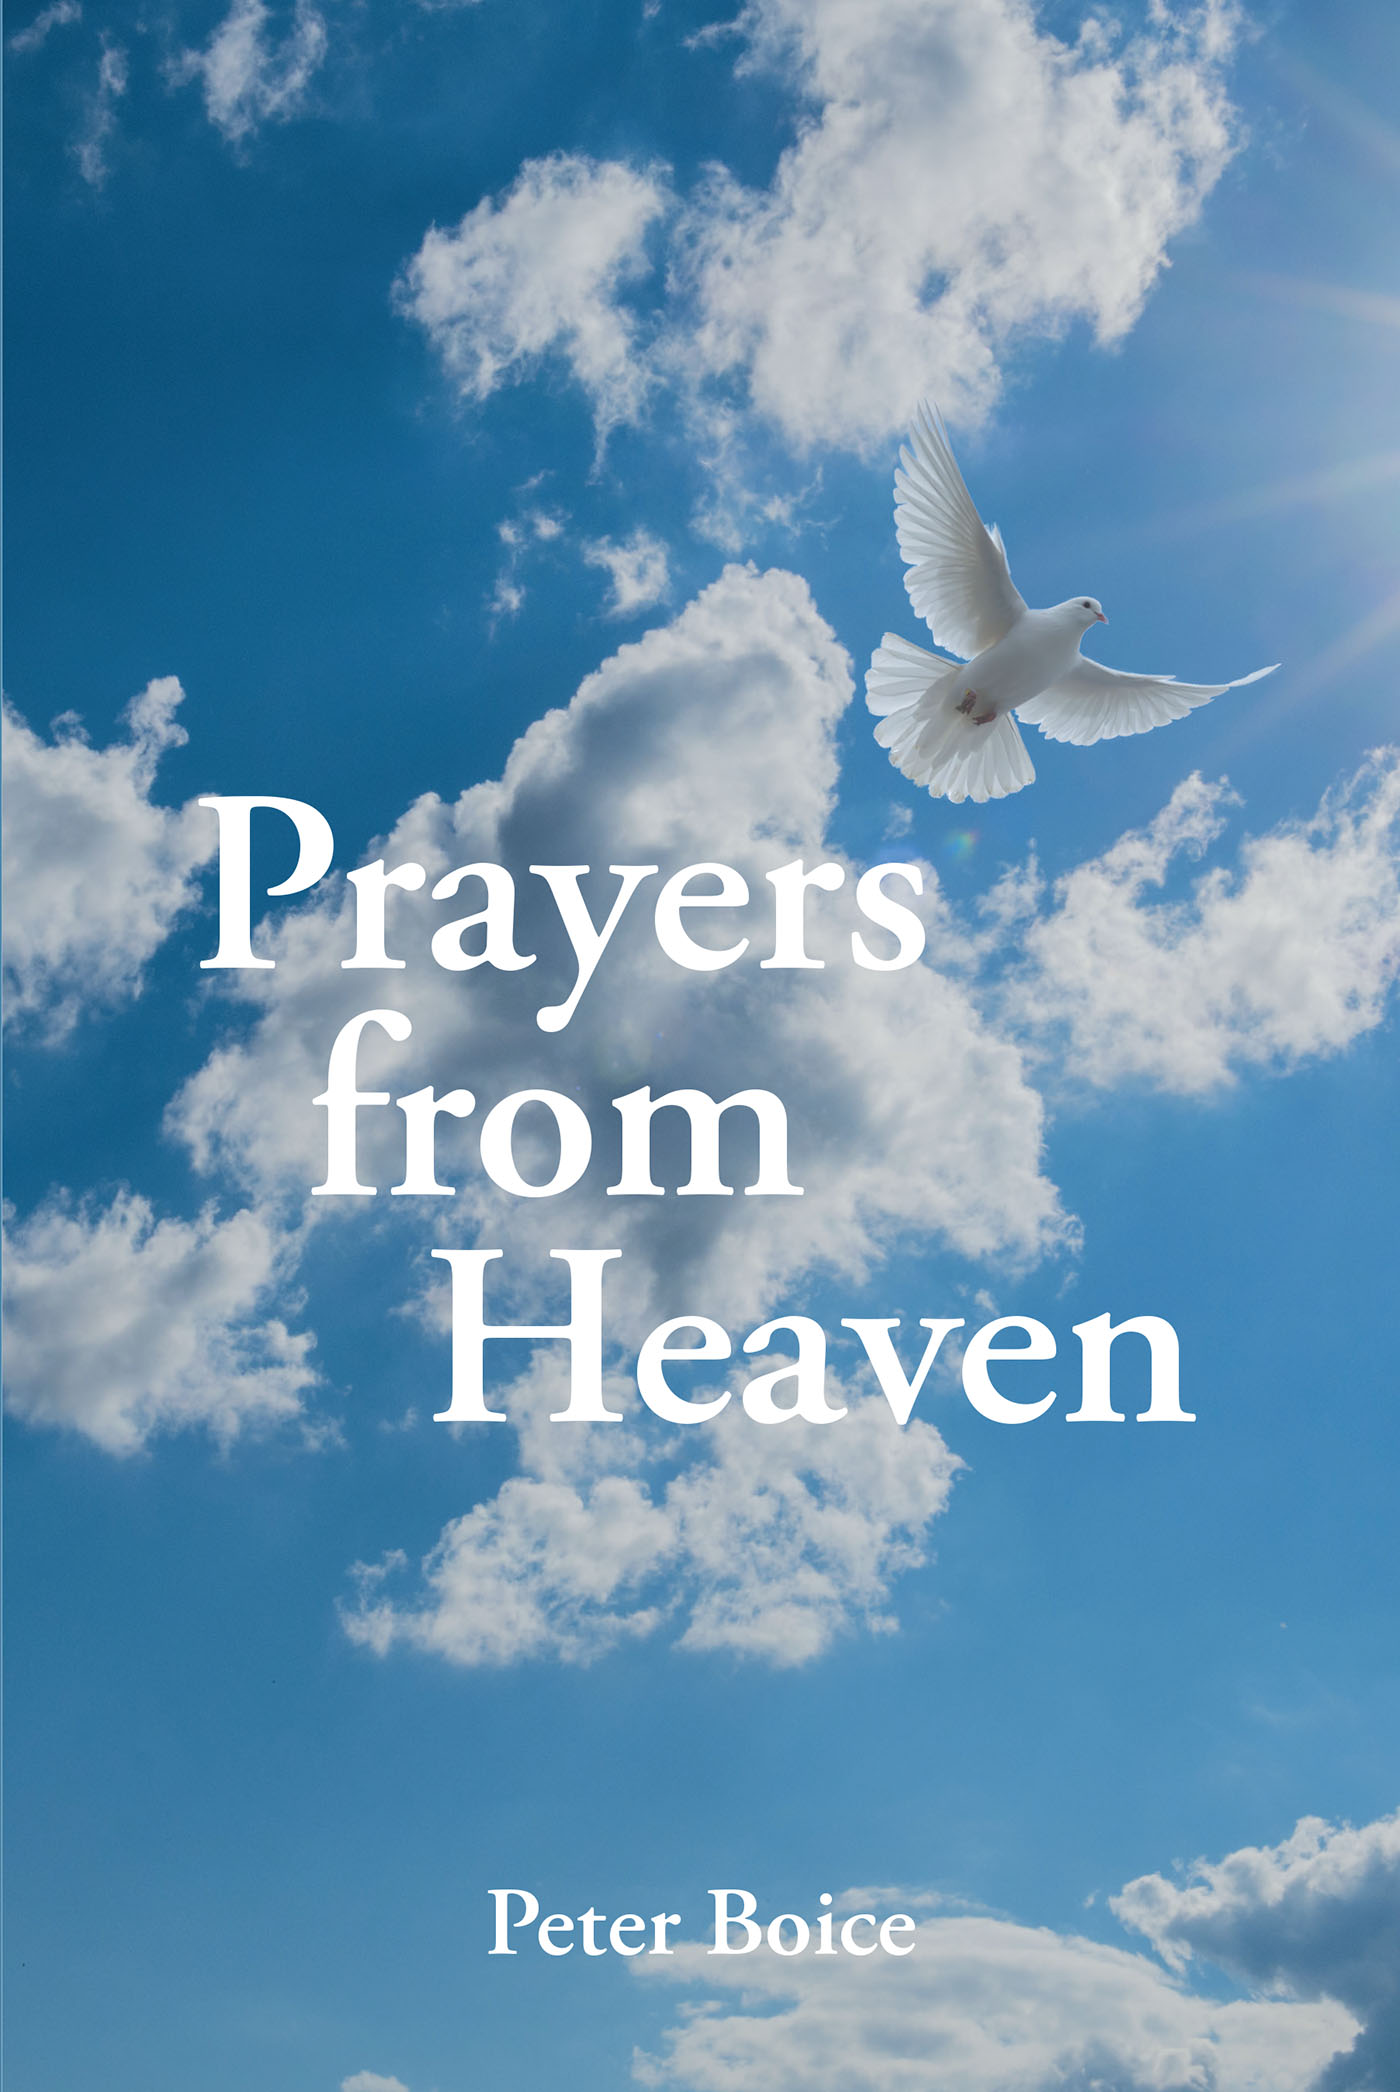 Peter Boice’s Newly Released "Prayers from Heaven" is a Potent Collection of Thoughtful and Reflective Spiritual Writings